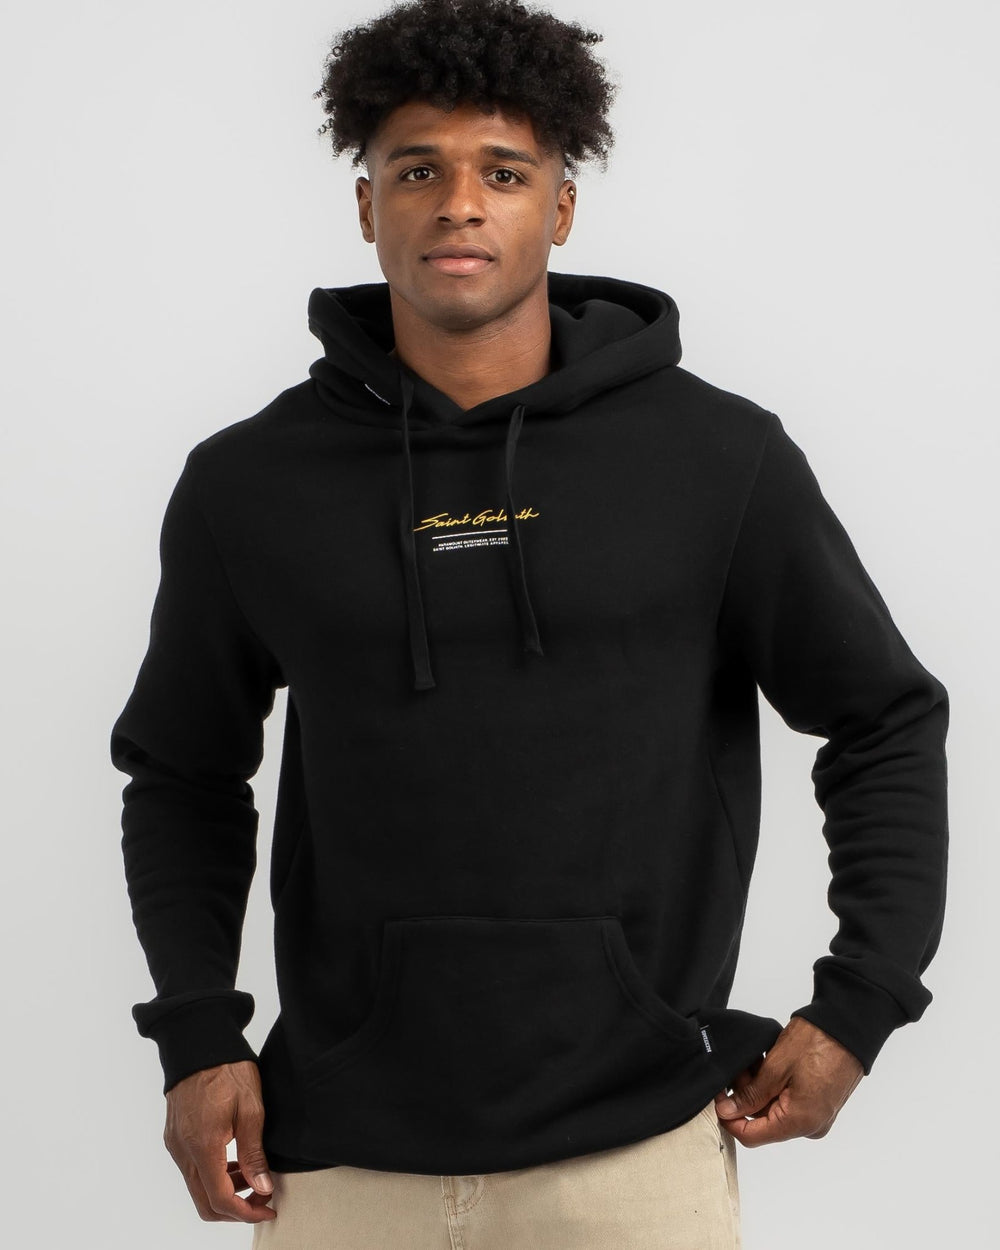 Escape Hoody - Washed Black - Chillis & More NZ